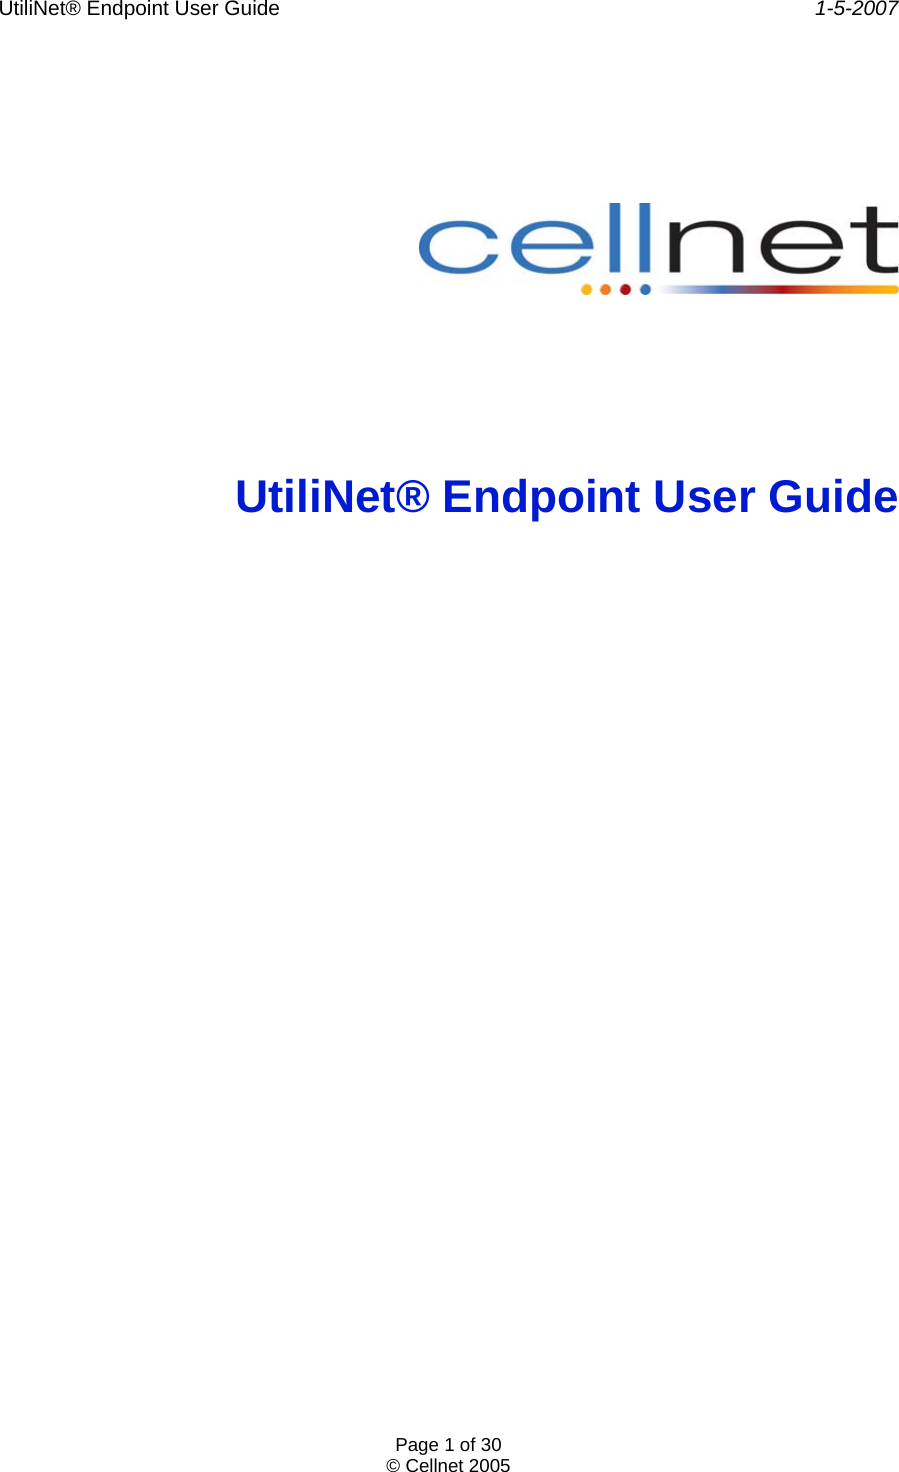 UtiliNet® Endpoint User Guide    1-5-2007 Page 1 of 30 © Cellnet 2005        UtiliNet® Endpoint User Guide   